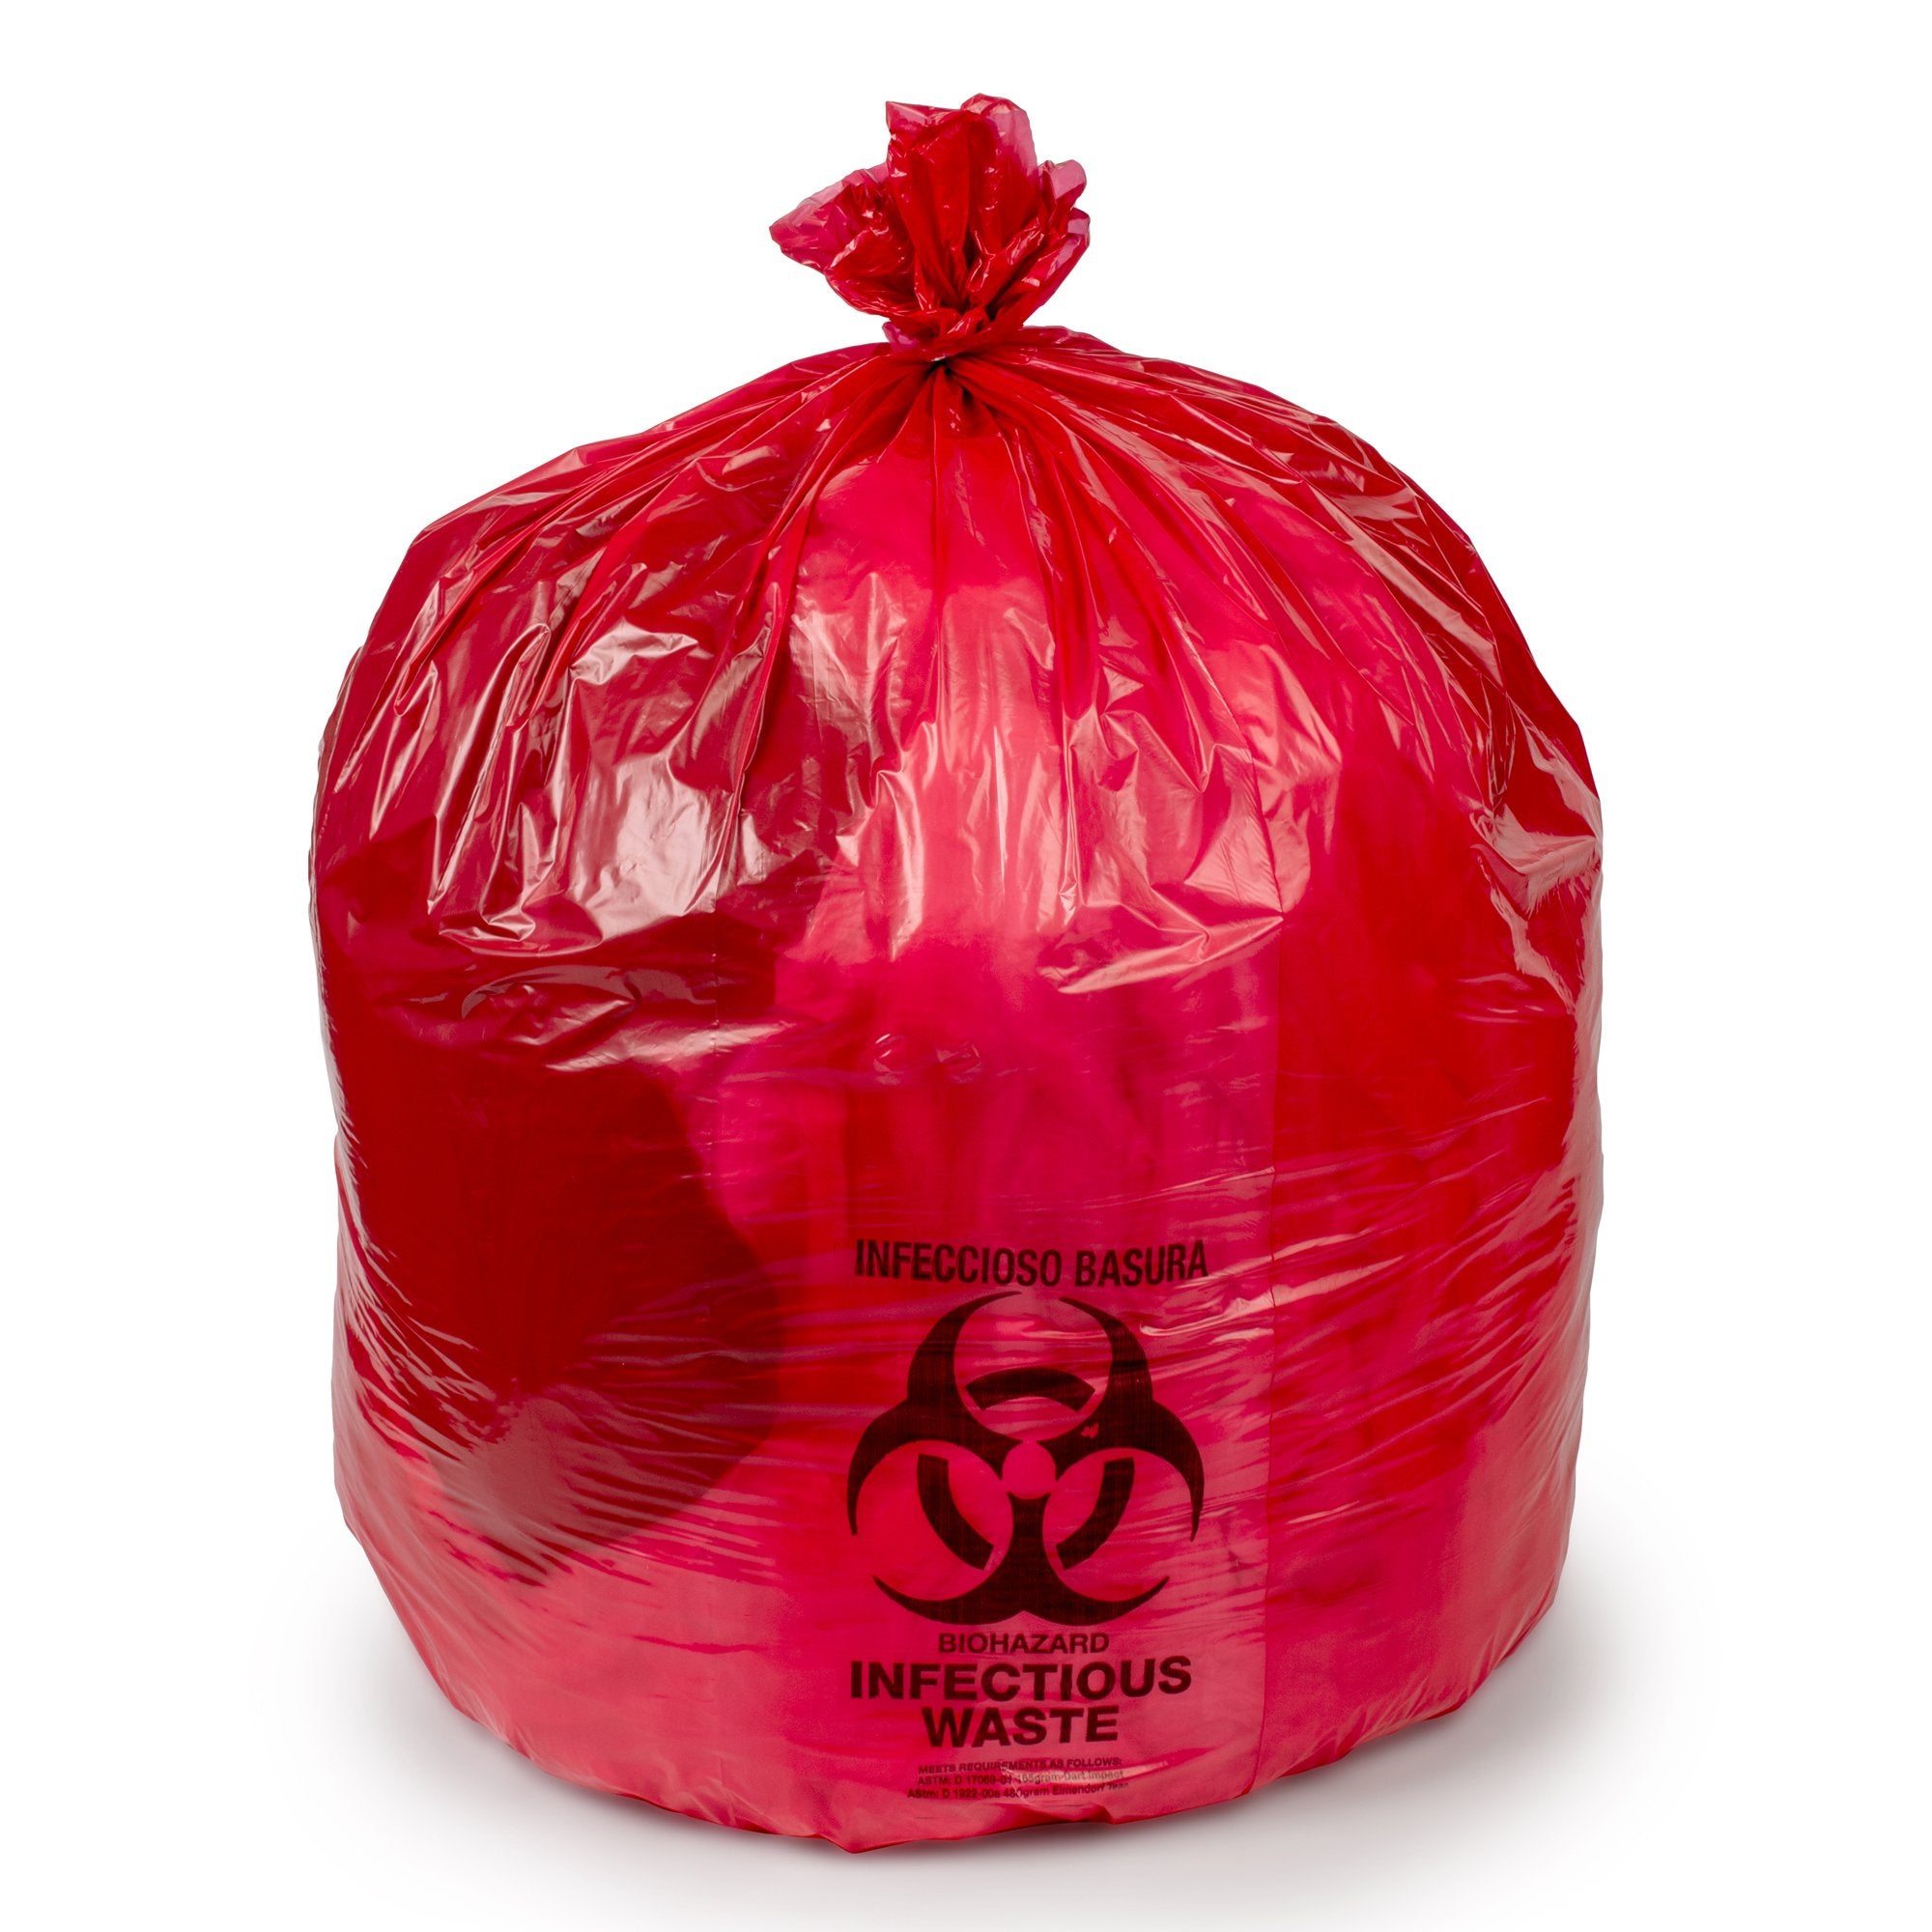 Infectious Waste Bag Colonial Bag 33 gal. Red Bag HDPE 33 X 40 Inch